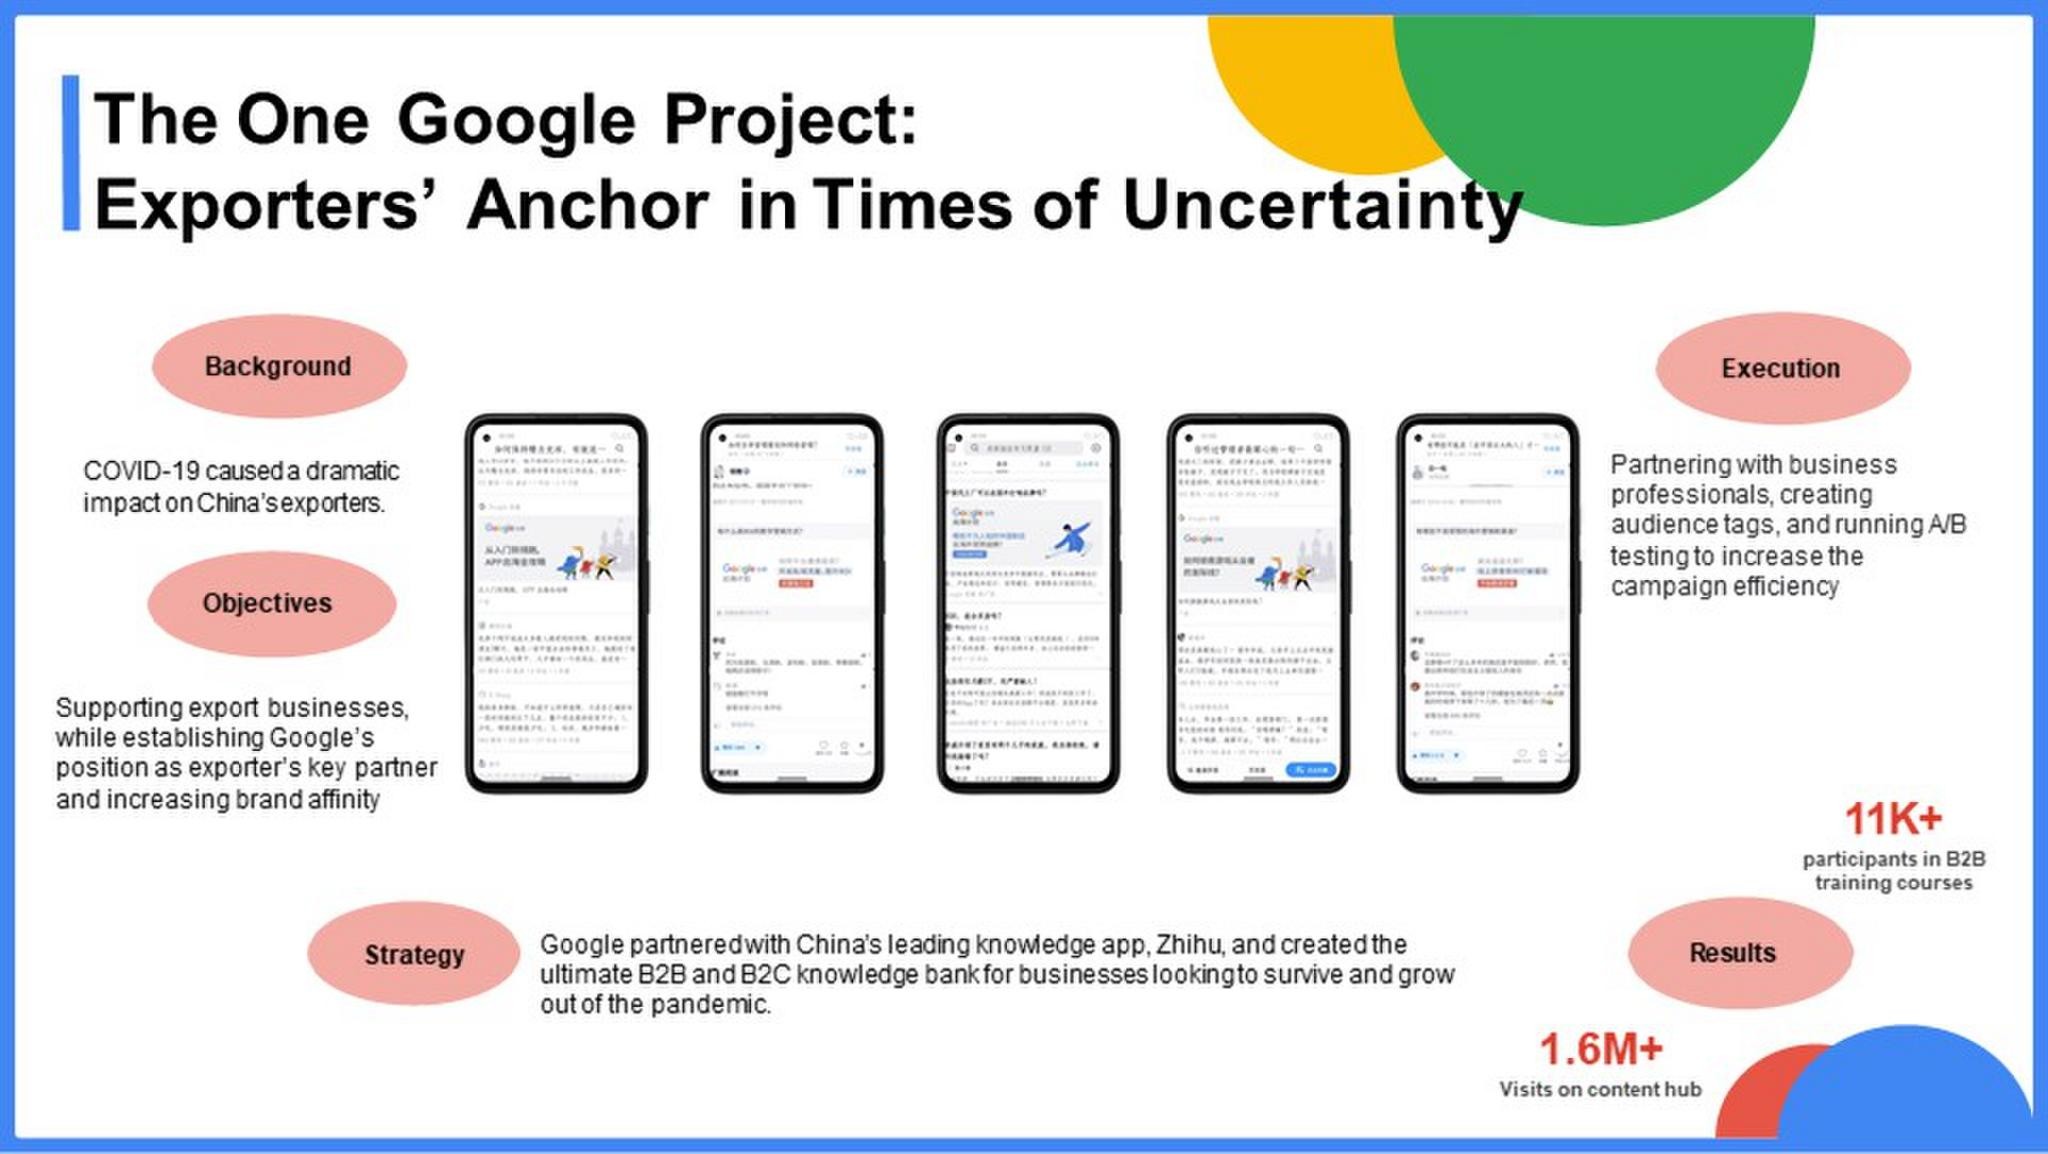 The One Google Project: Exporters' Anchor in Times of Uncertainty